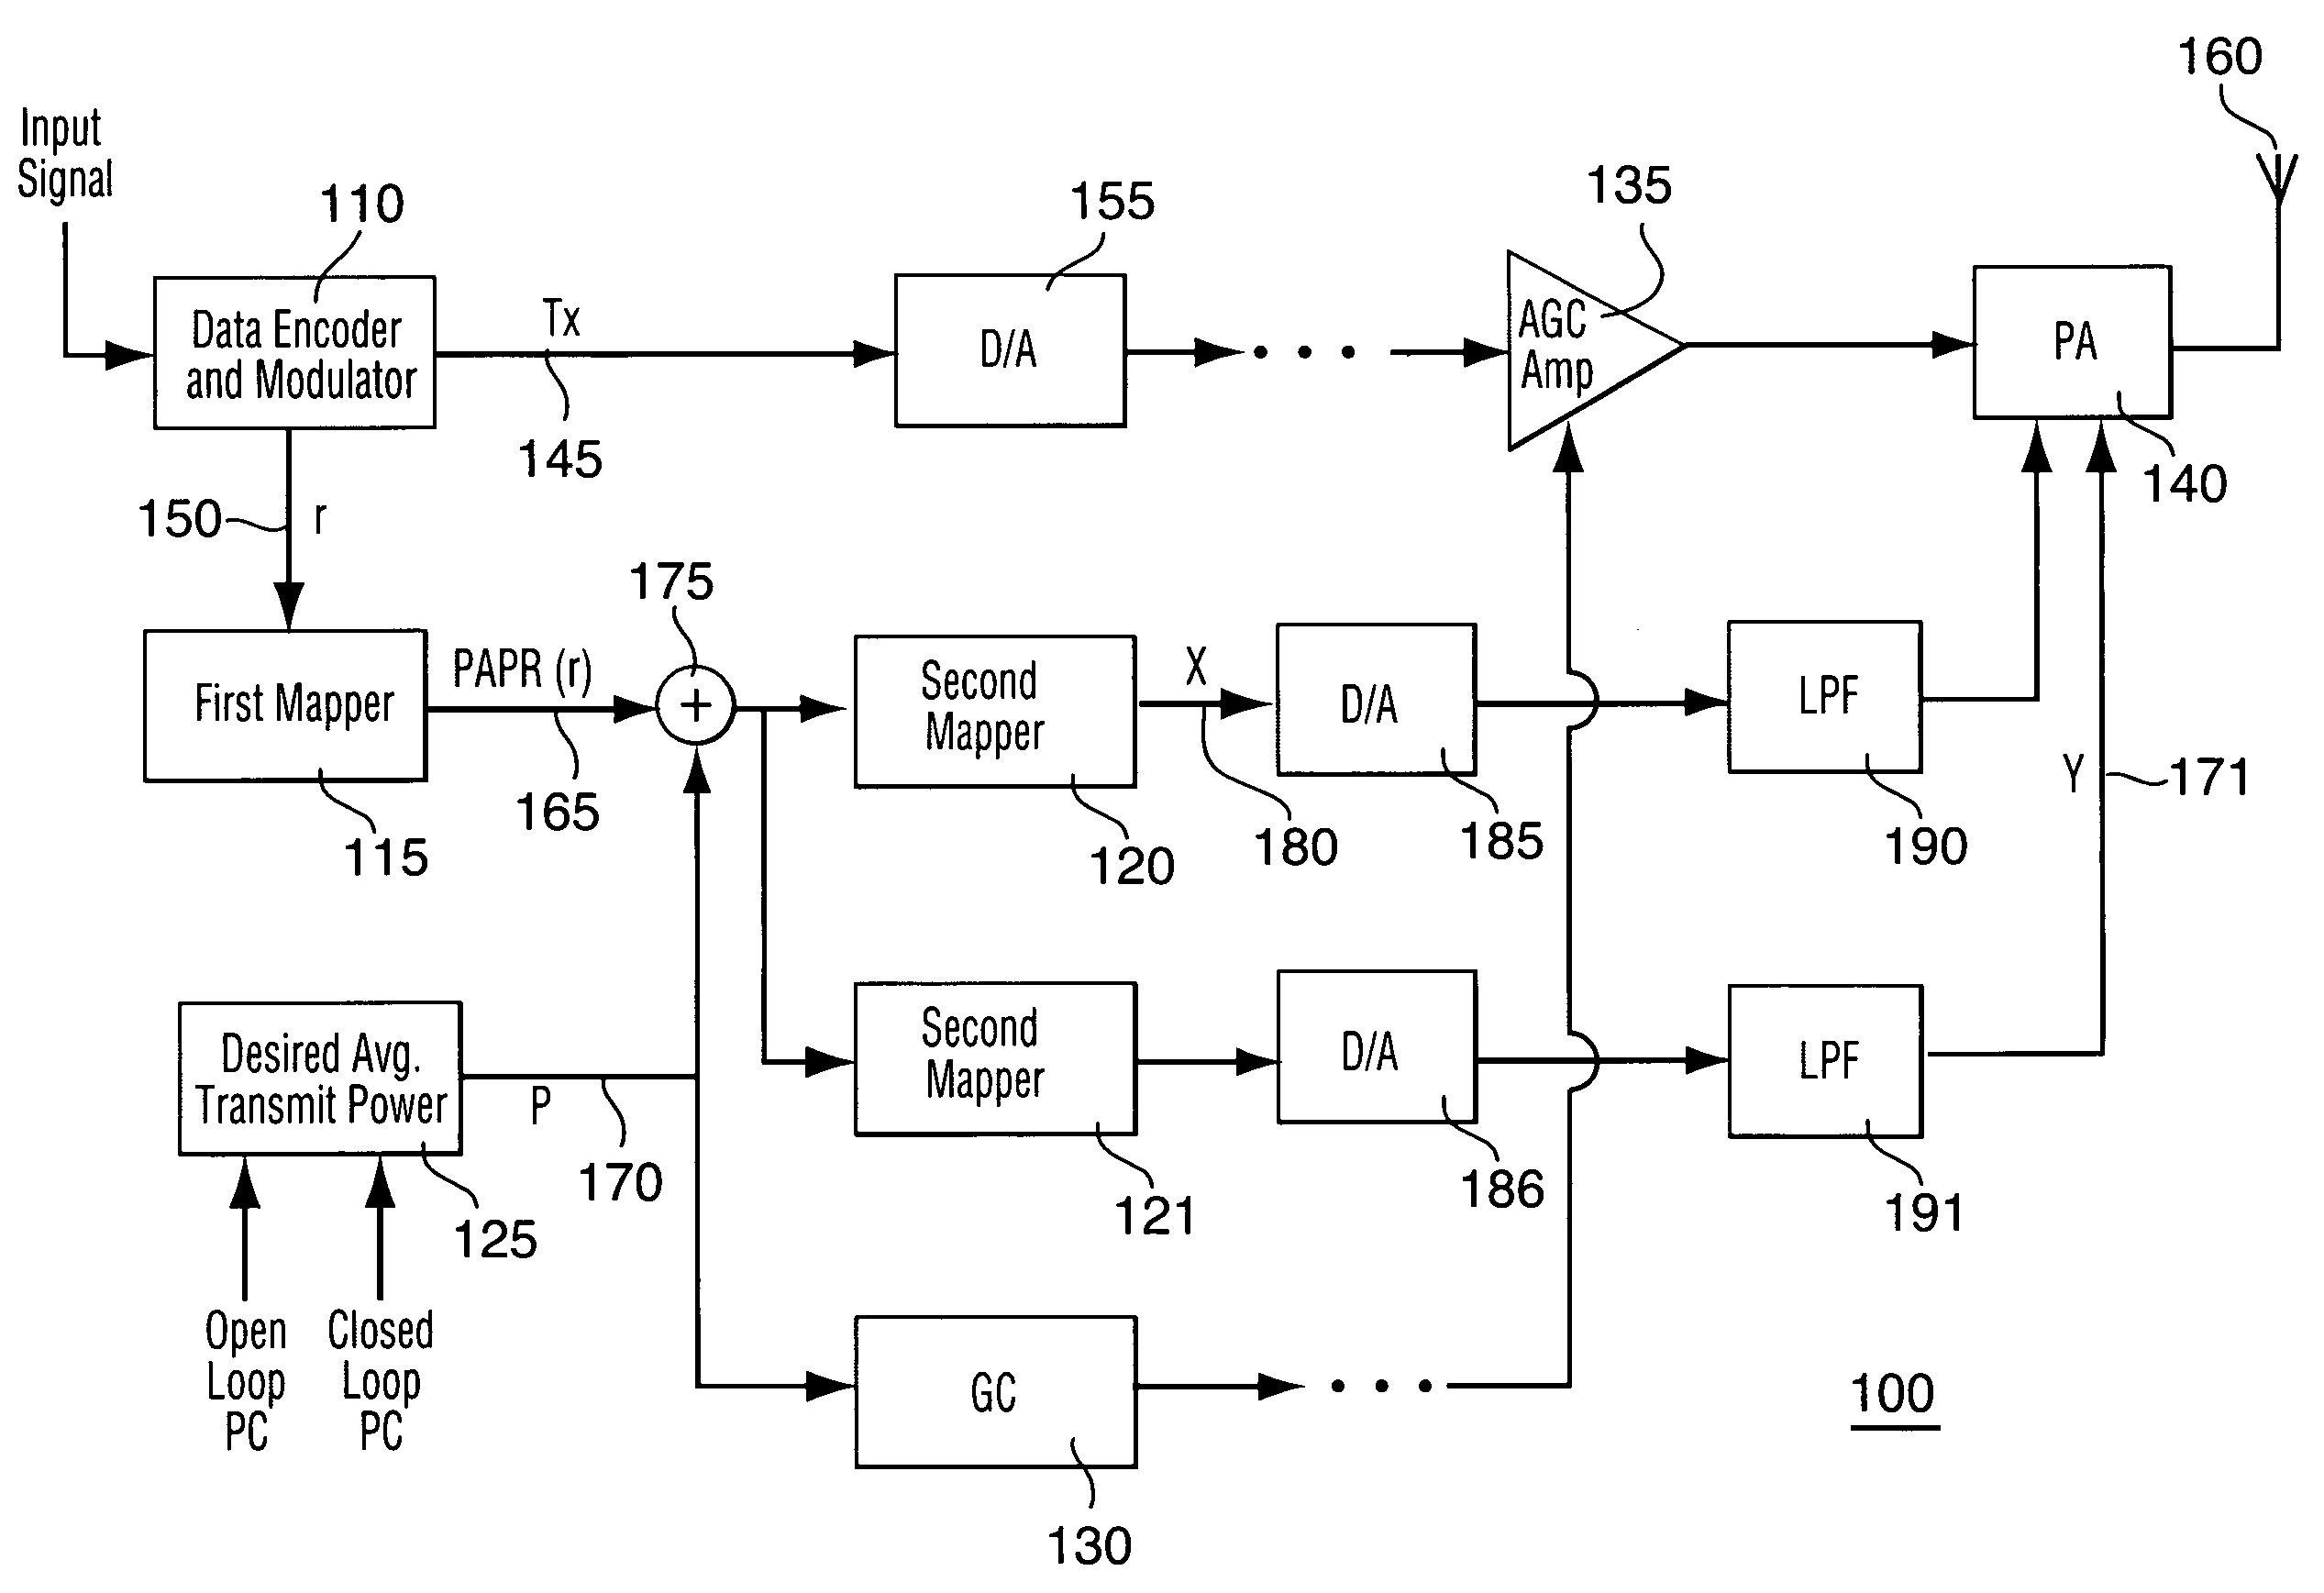 Method and apparatus for optimizing transmitter power efficiency